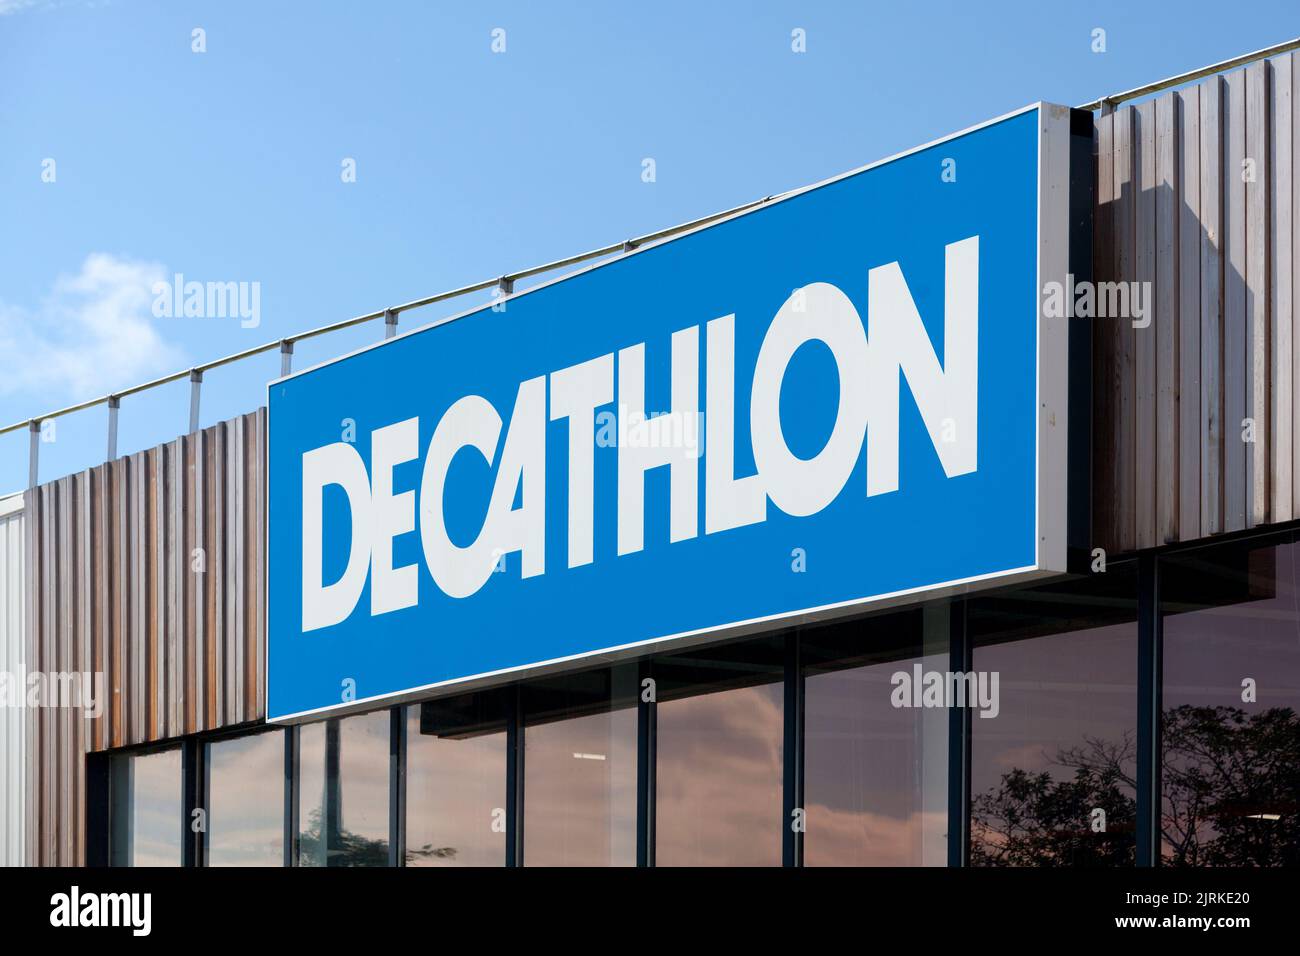 Sao Paulo, Brazil - december 29 2019 - Decathlon sign on building in  Paulista avenue. Decathlon is a french company and one of the world's  largest sporting goods retailers Photos